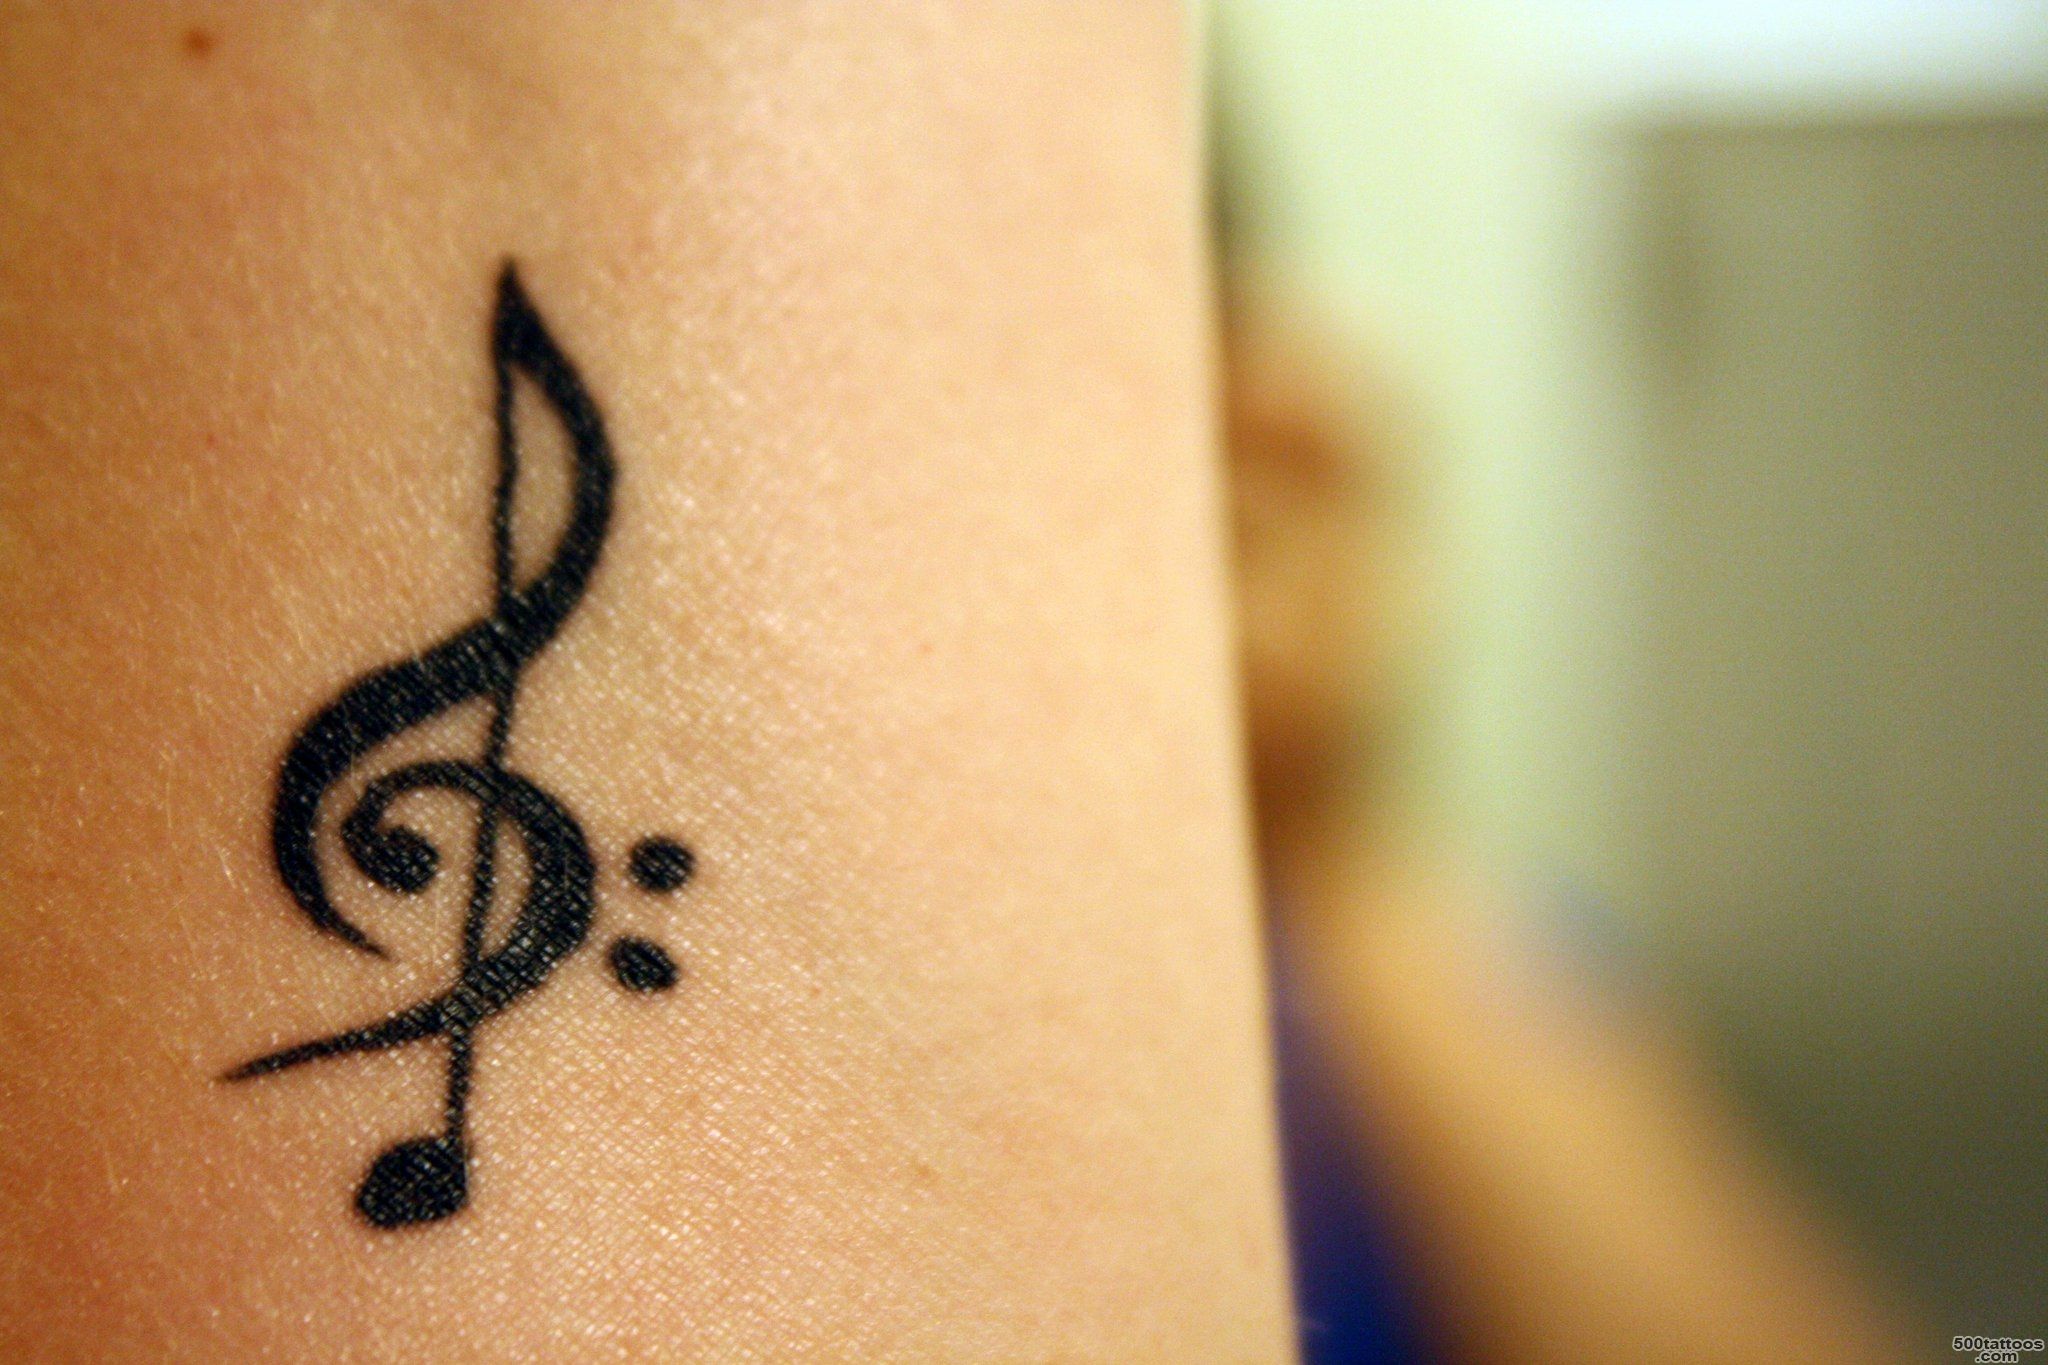 Top Clef Tattoo 2 Images for Pinterest Tattoos_30